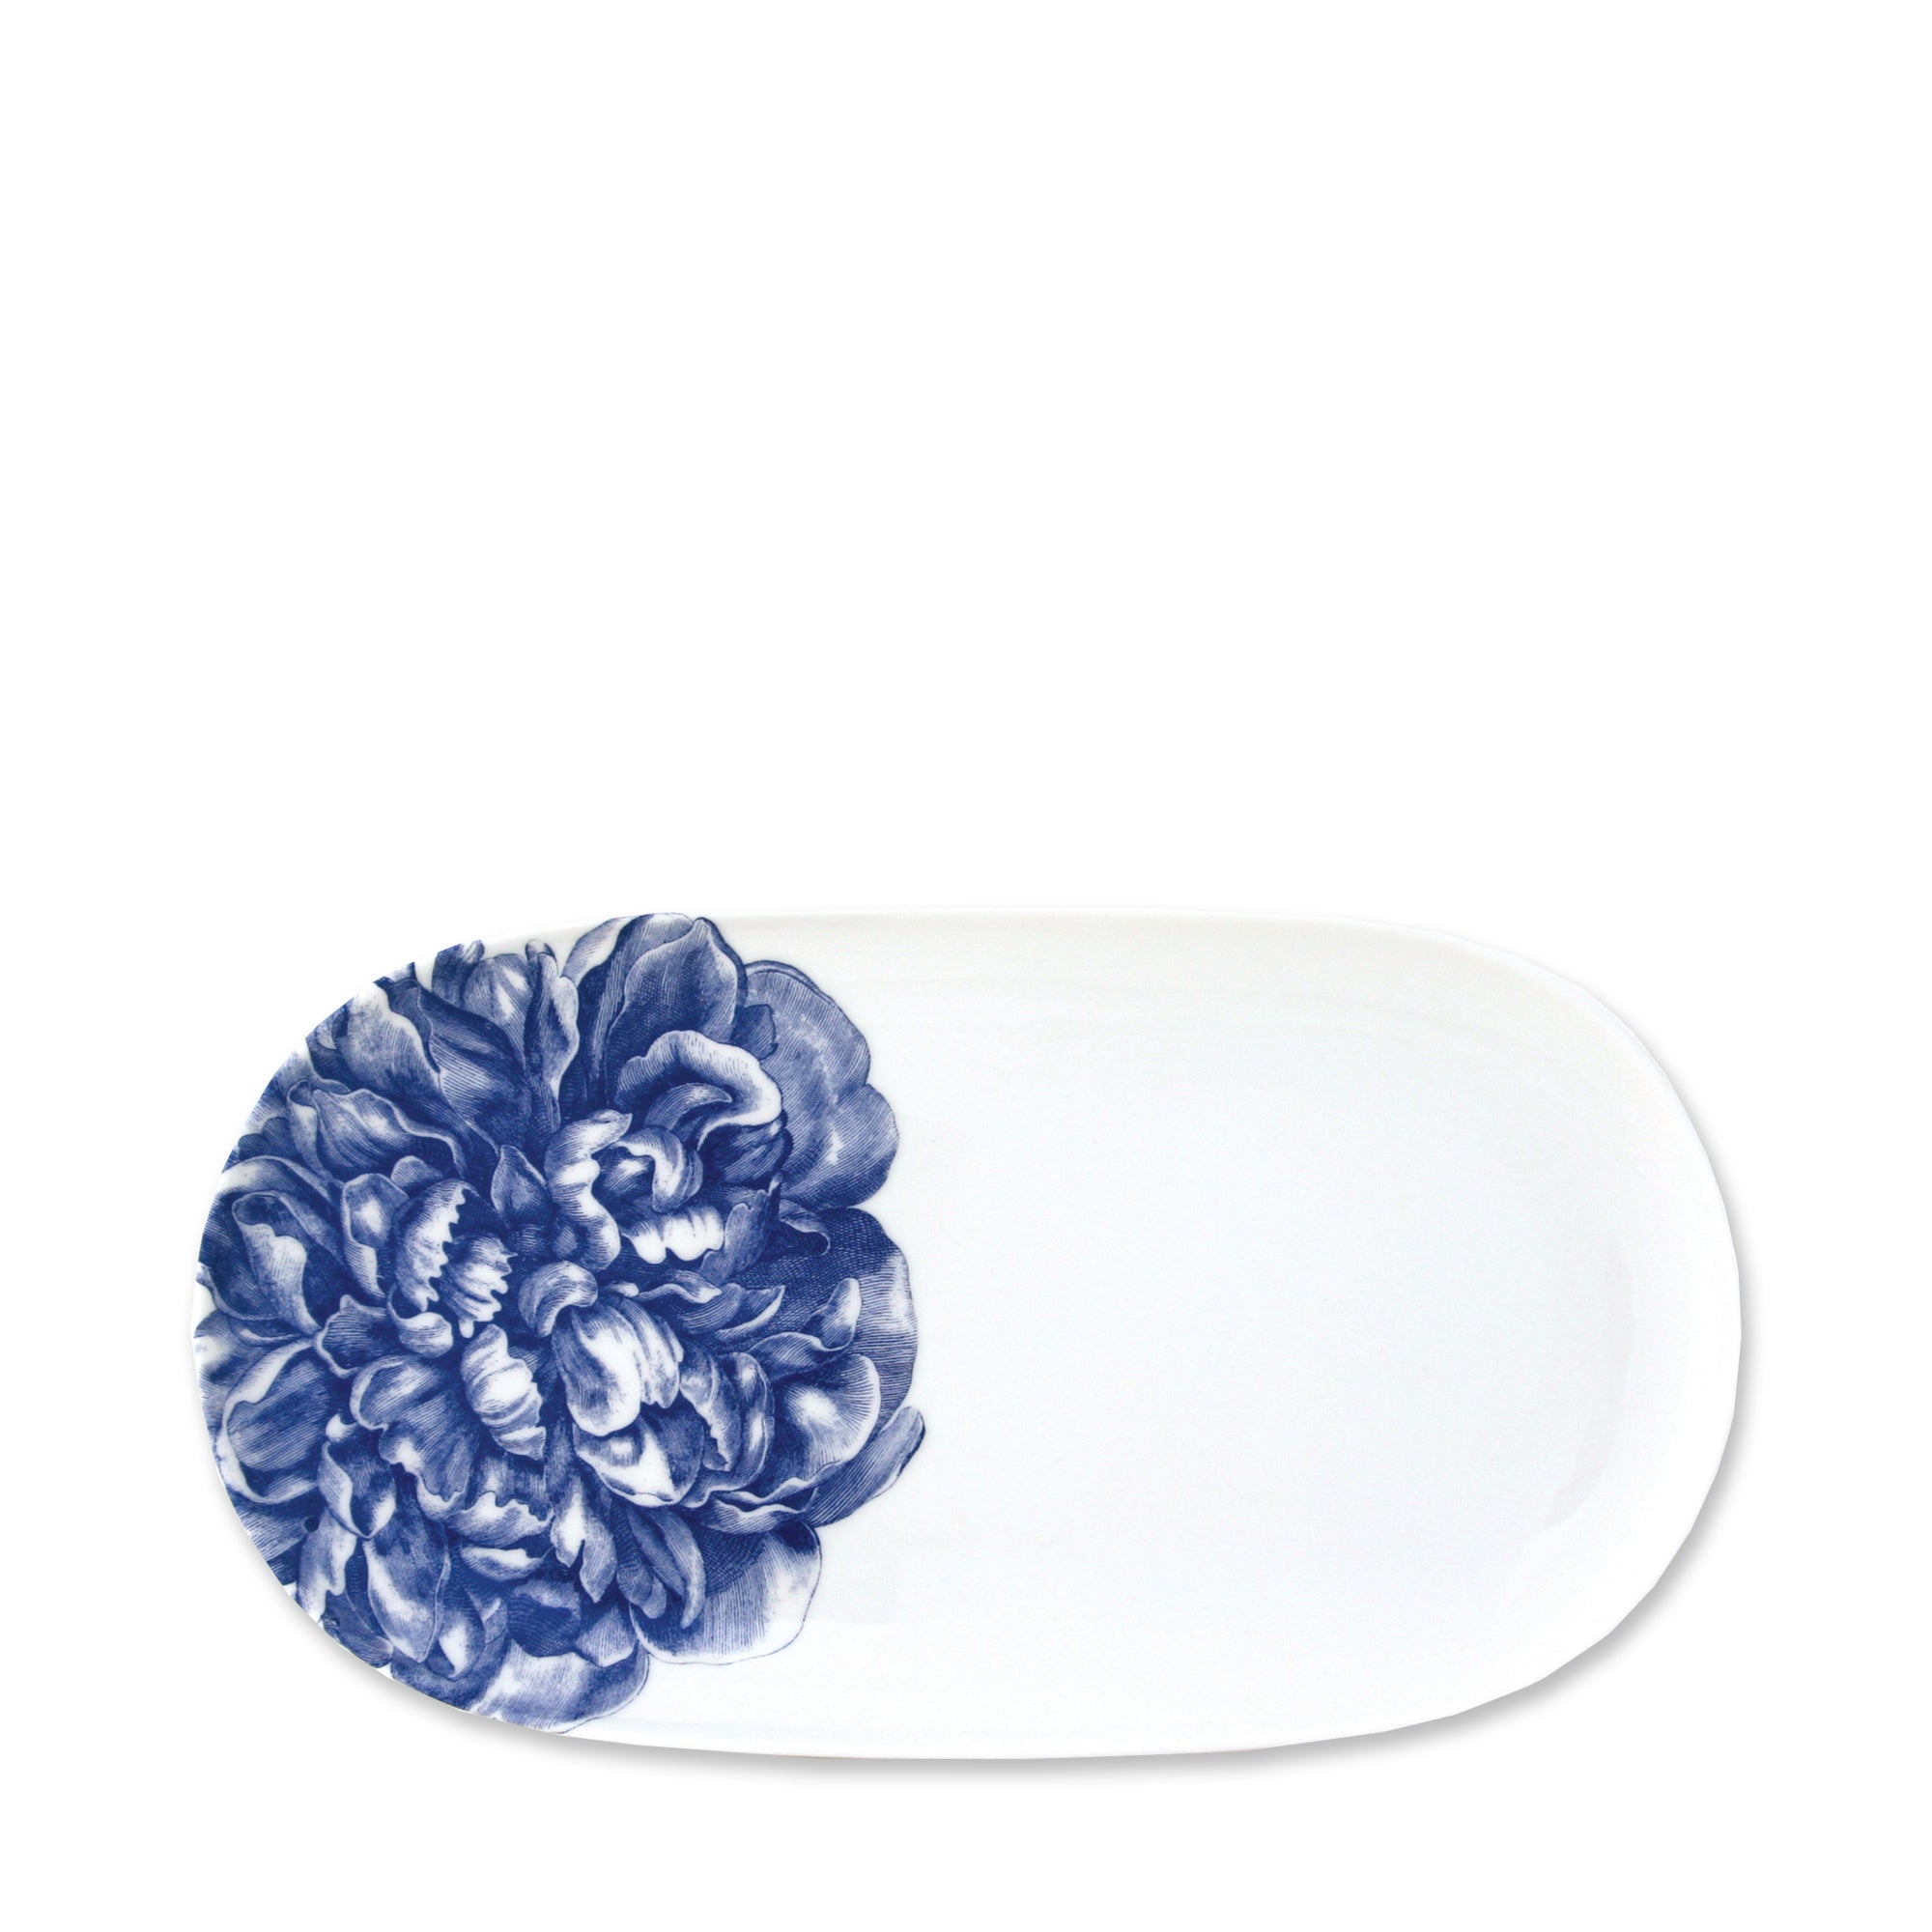 A Peony Small Oval Tray from Caskata Artisanal Home with a blue floral design on one end, perfect for adding a touch of elegance to your blue and white dinnerware collection.